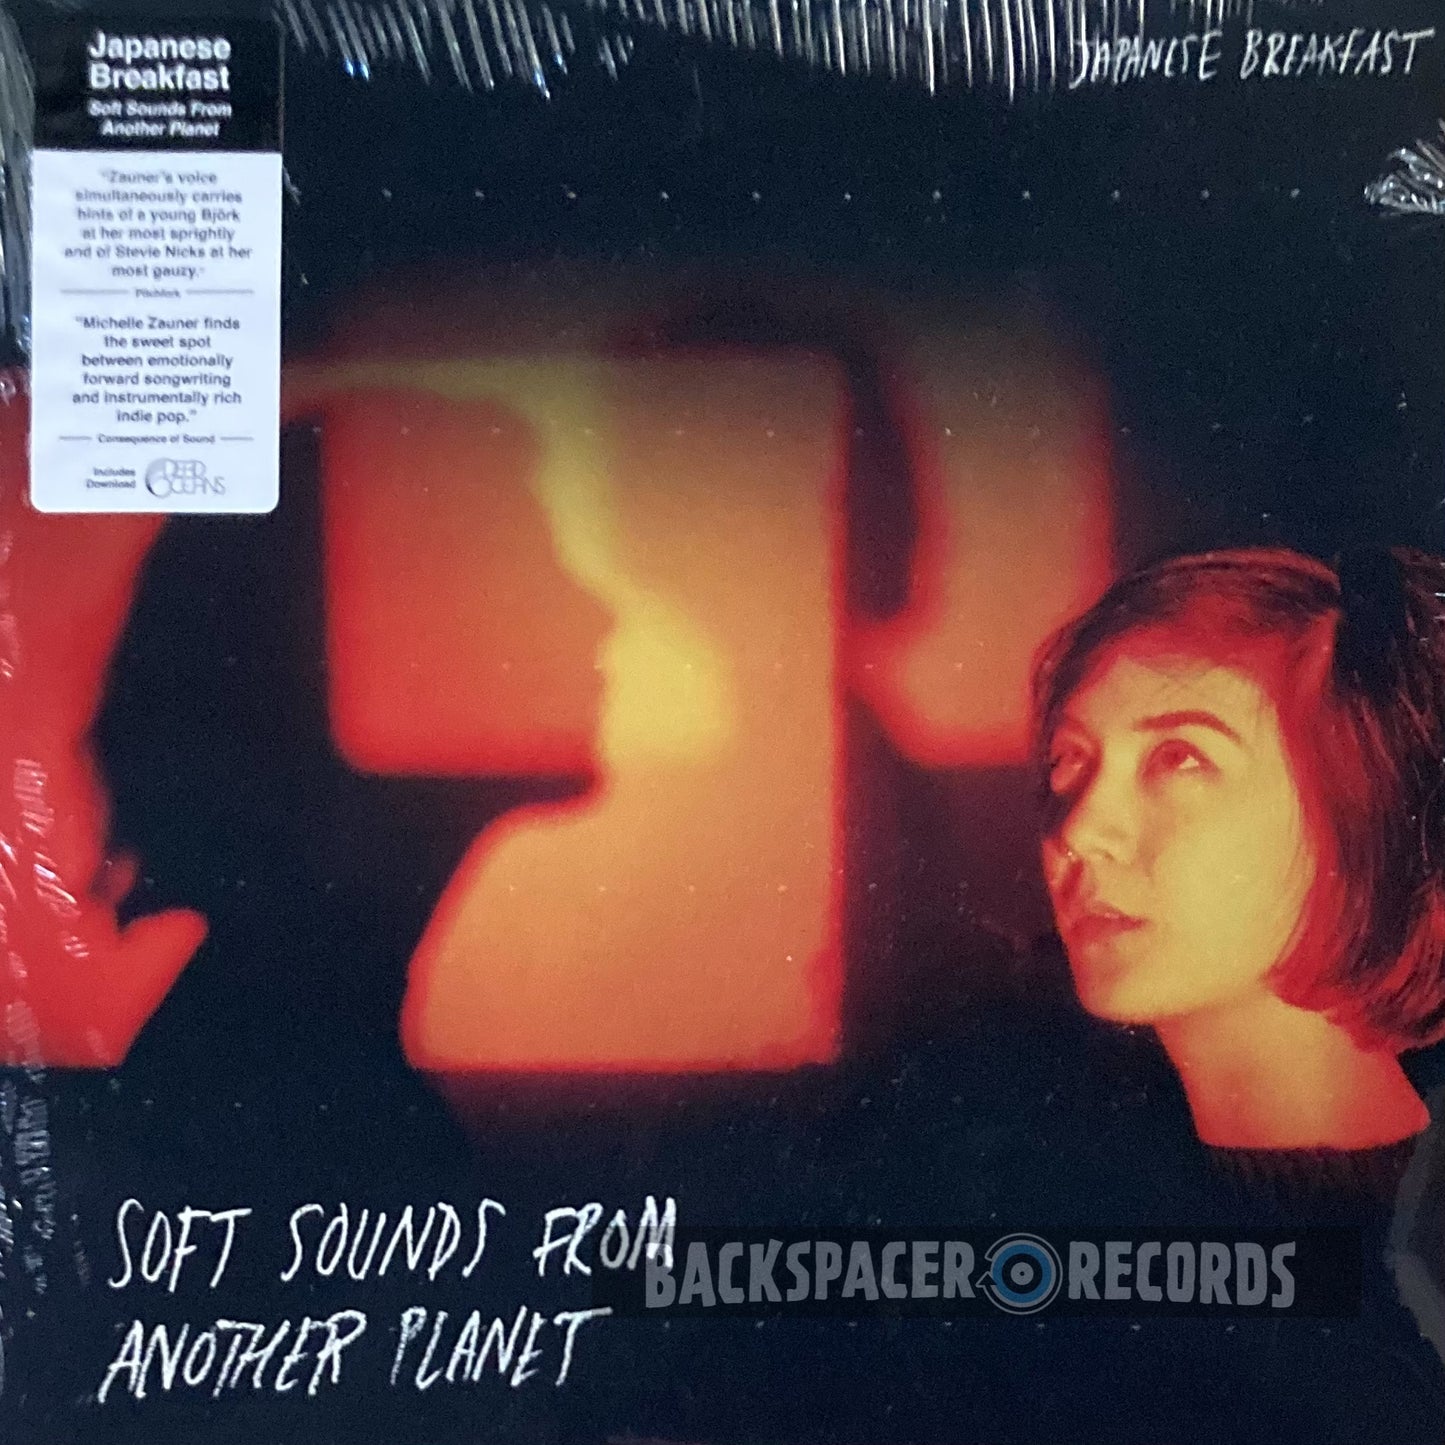 Japanese Breakfast – Soft Sounds From Another Planet LP (Sealed)